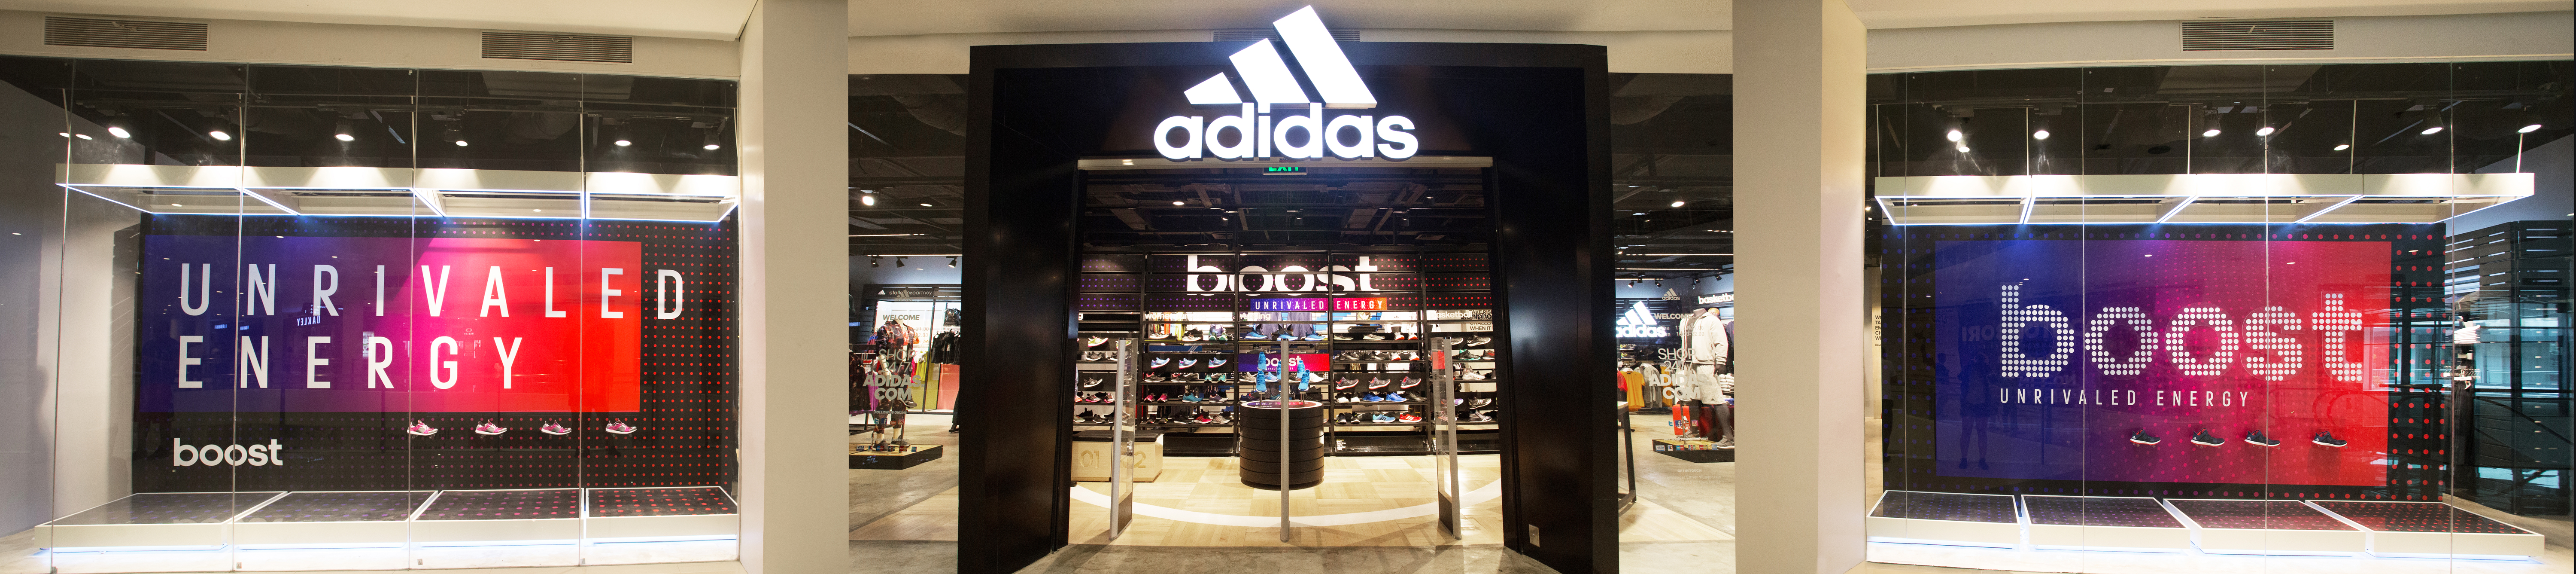 adidas town center off 51% - www.ncccc 